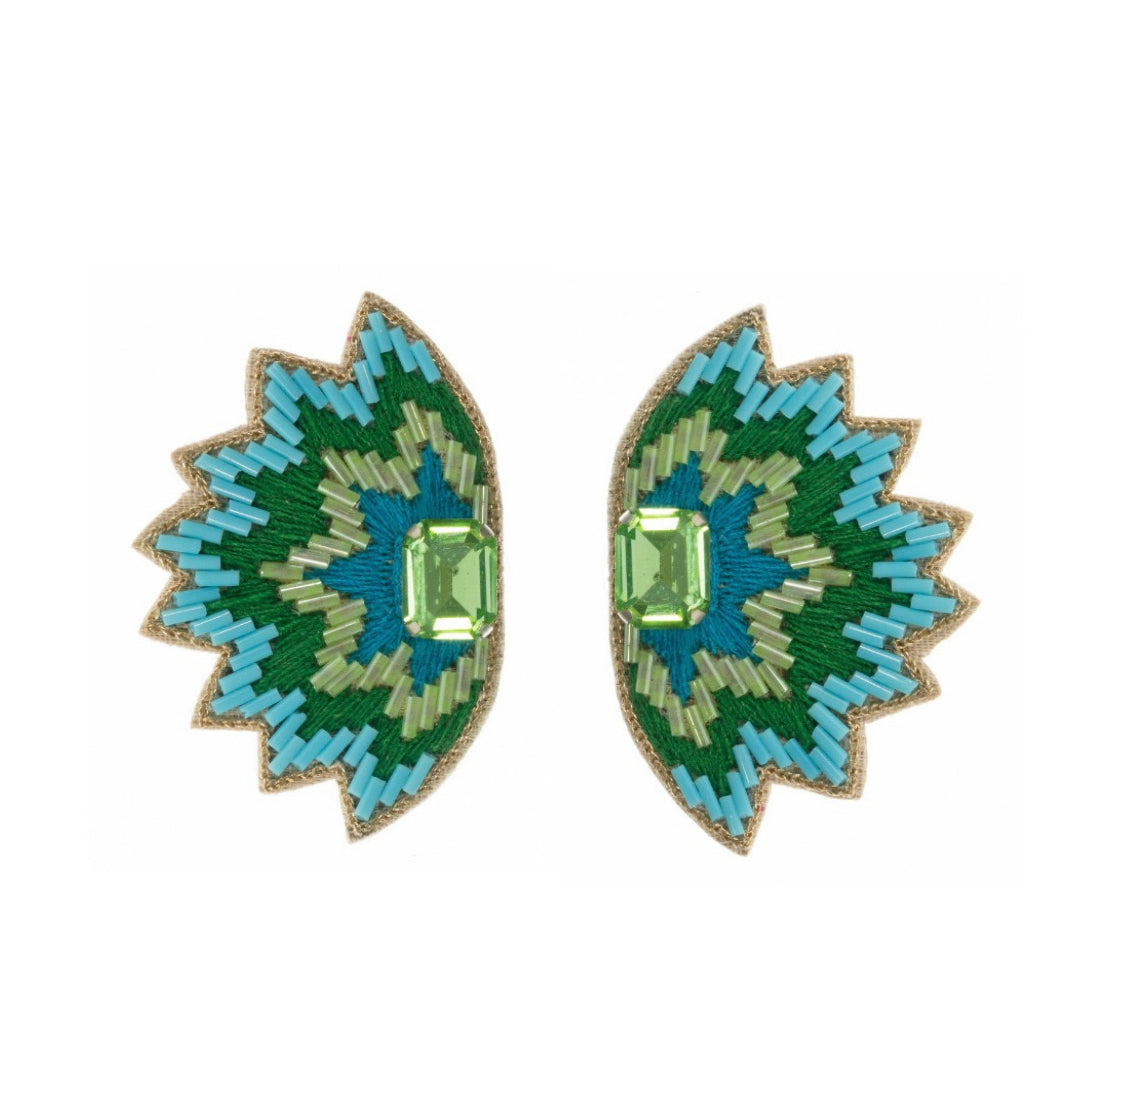 Soho Studs in Blue and Green